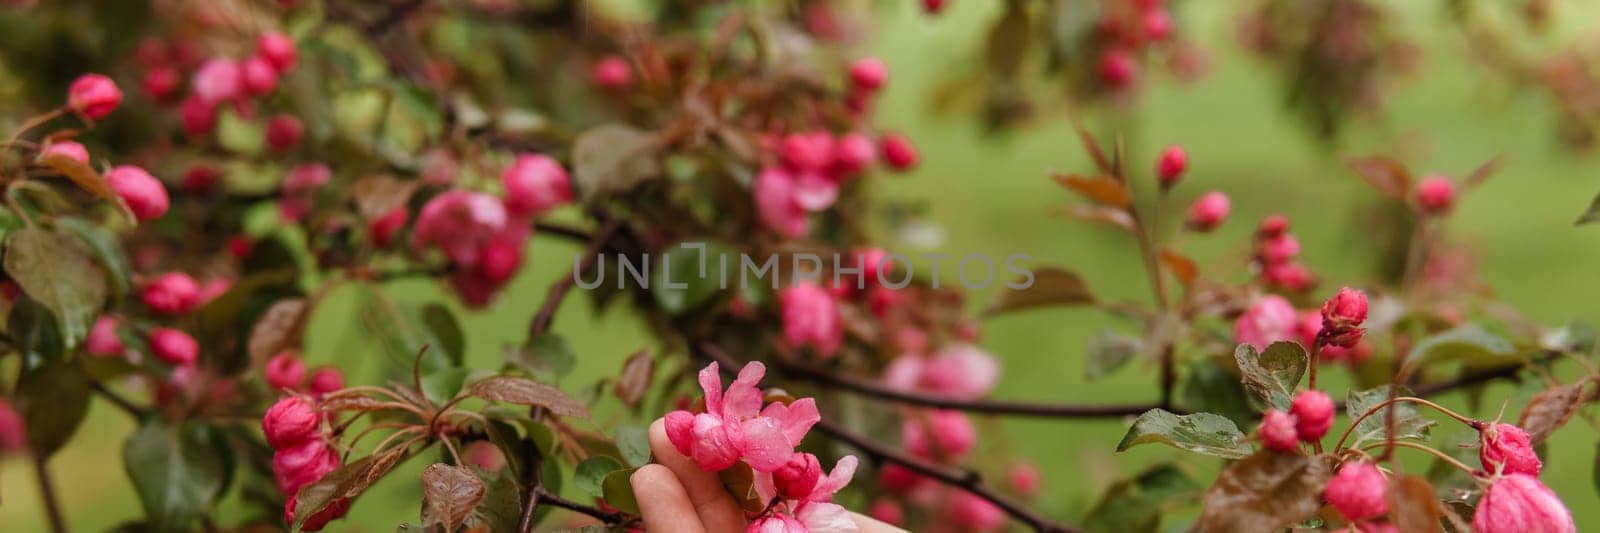 Pink flowers of a blossoming apple tree in a woman's hand. by Annu1tochka